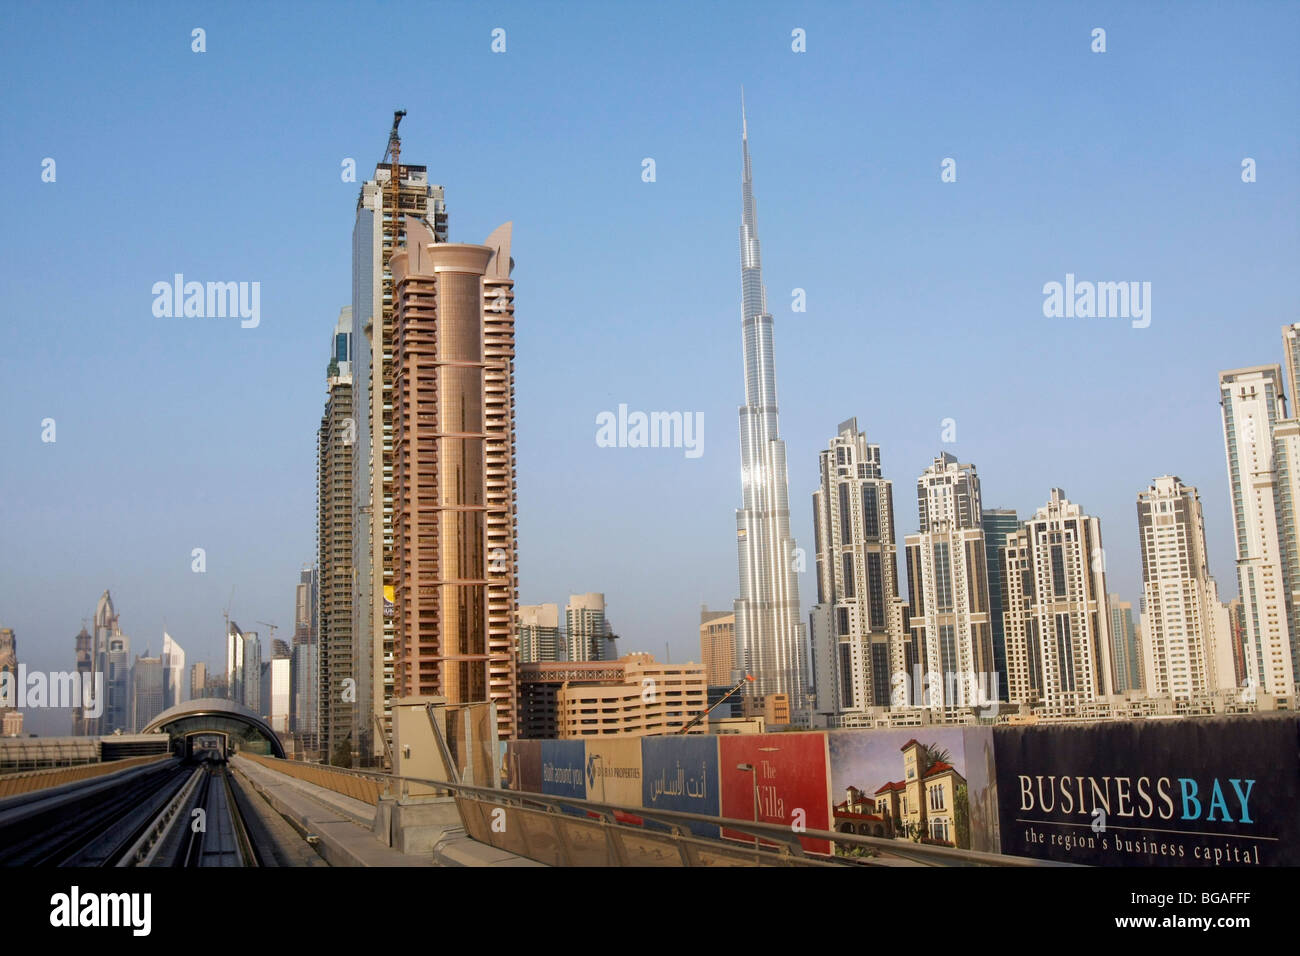 High-rise buildings at the Financial Center in Dubai. The tall narrow building is the Burj Tower, the world's tallest building. Stock Photo